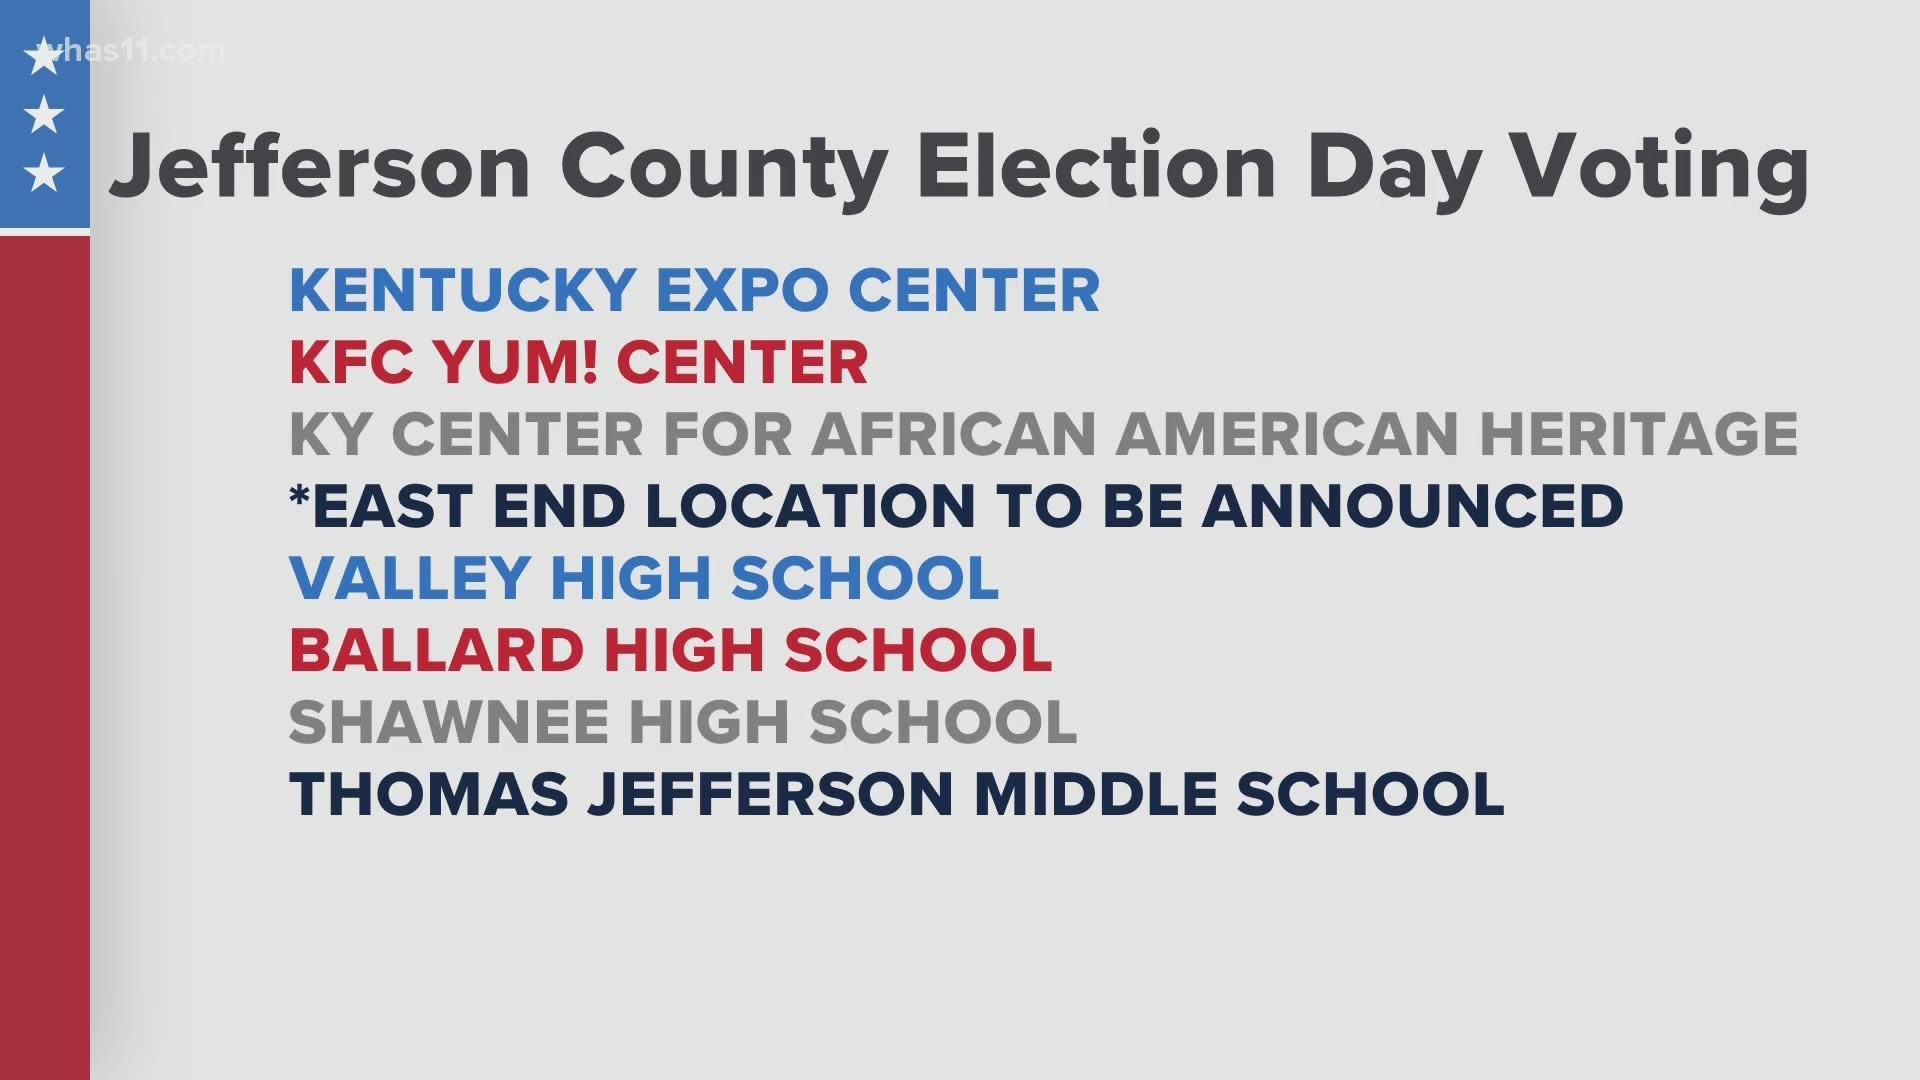 Each early voting site will be open beginning on October 13 through November 2.